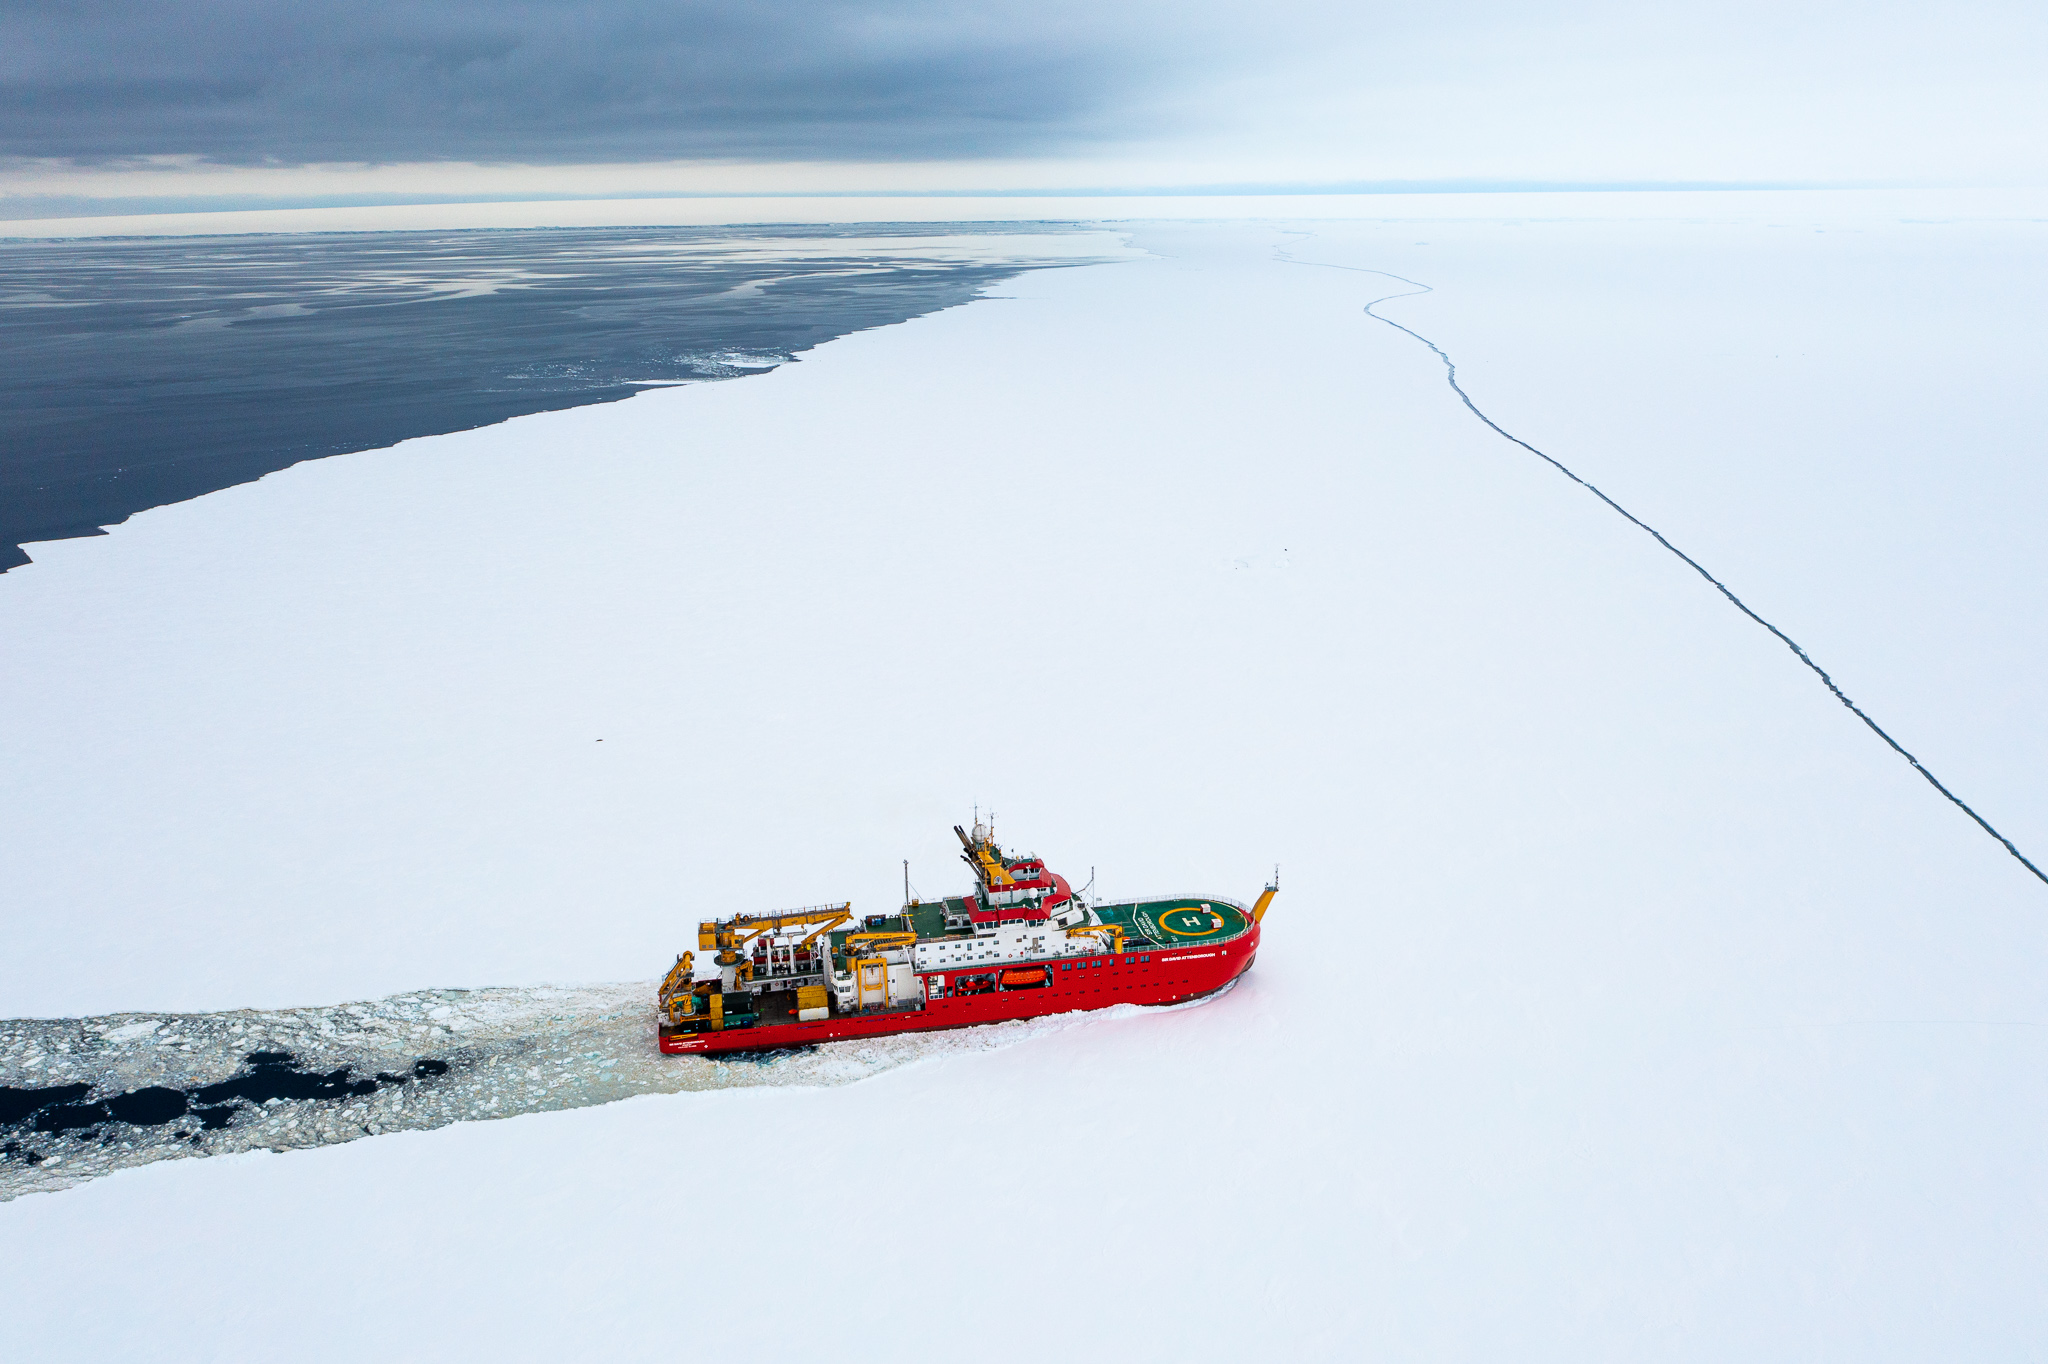 The vessel was tested through the ice (Jamie Anderson/BAS/PA)